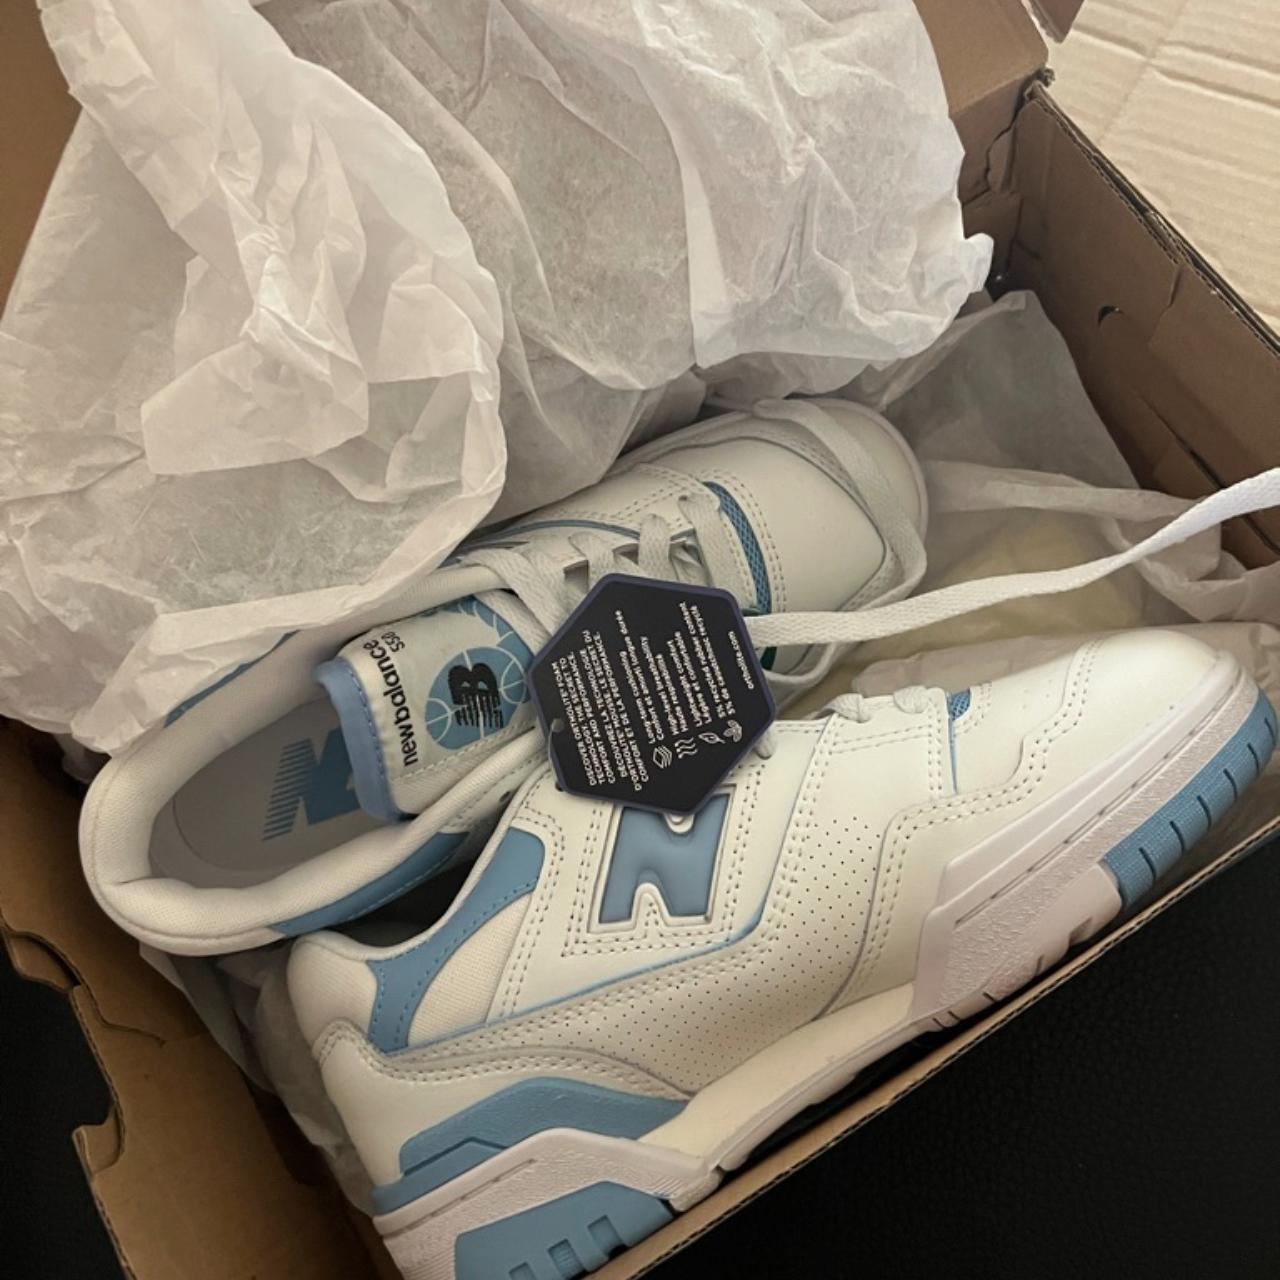 New Balance Women's White and Blue Trainers